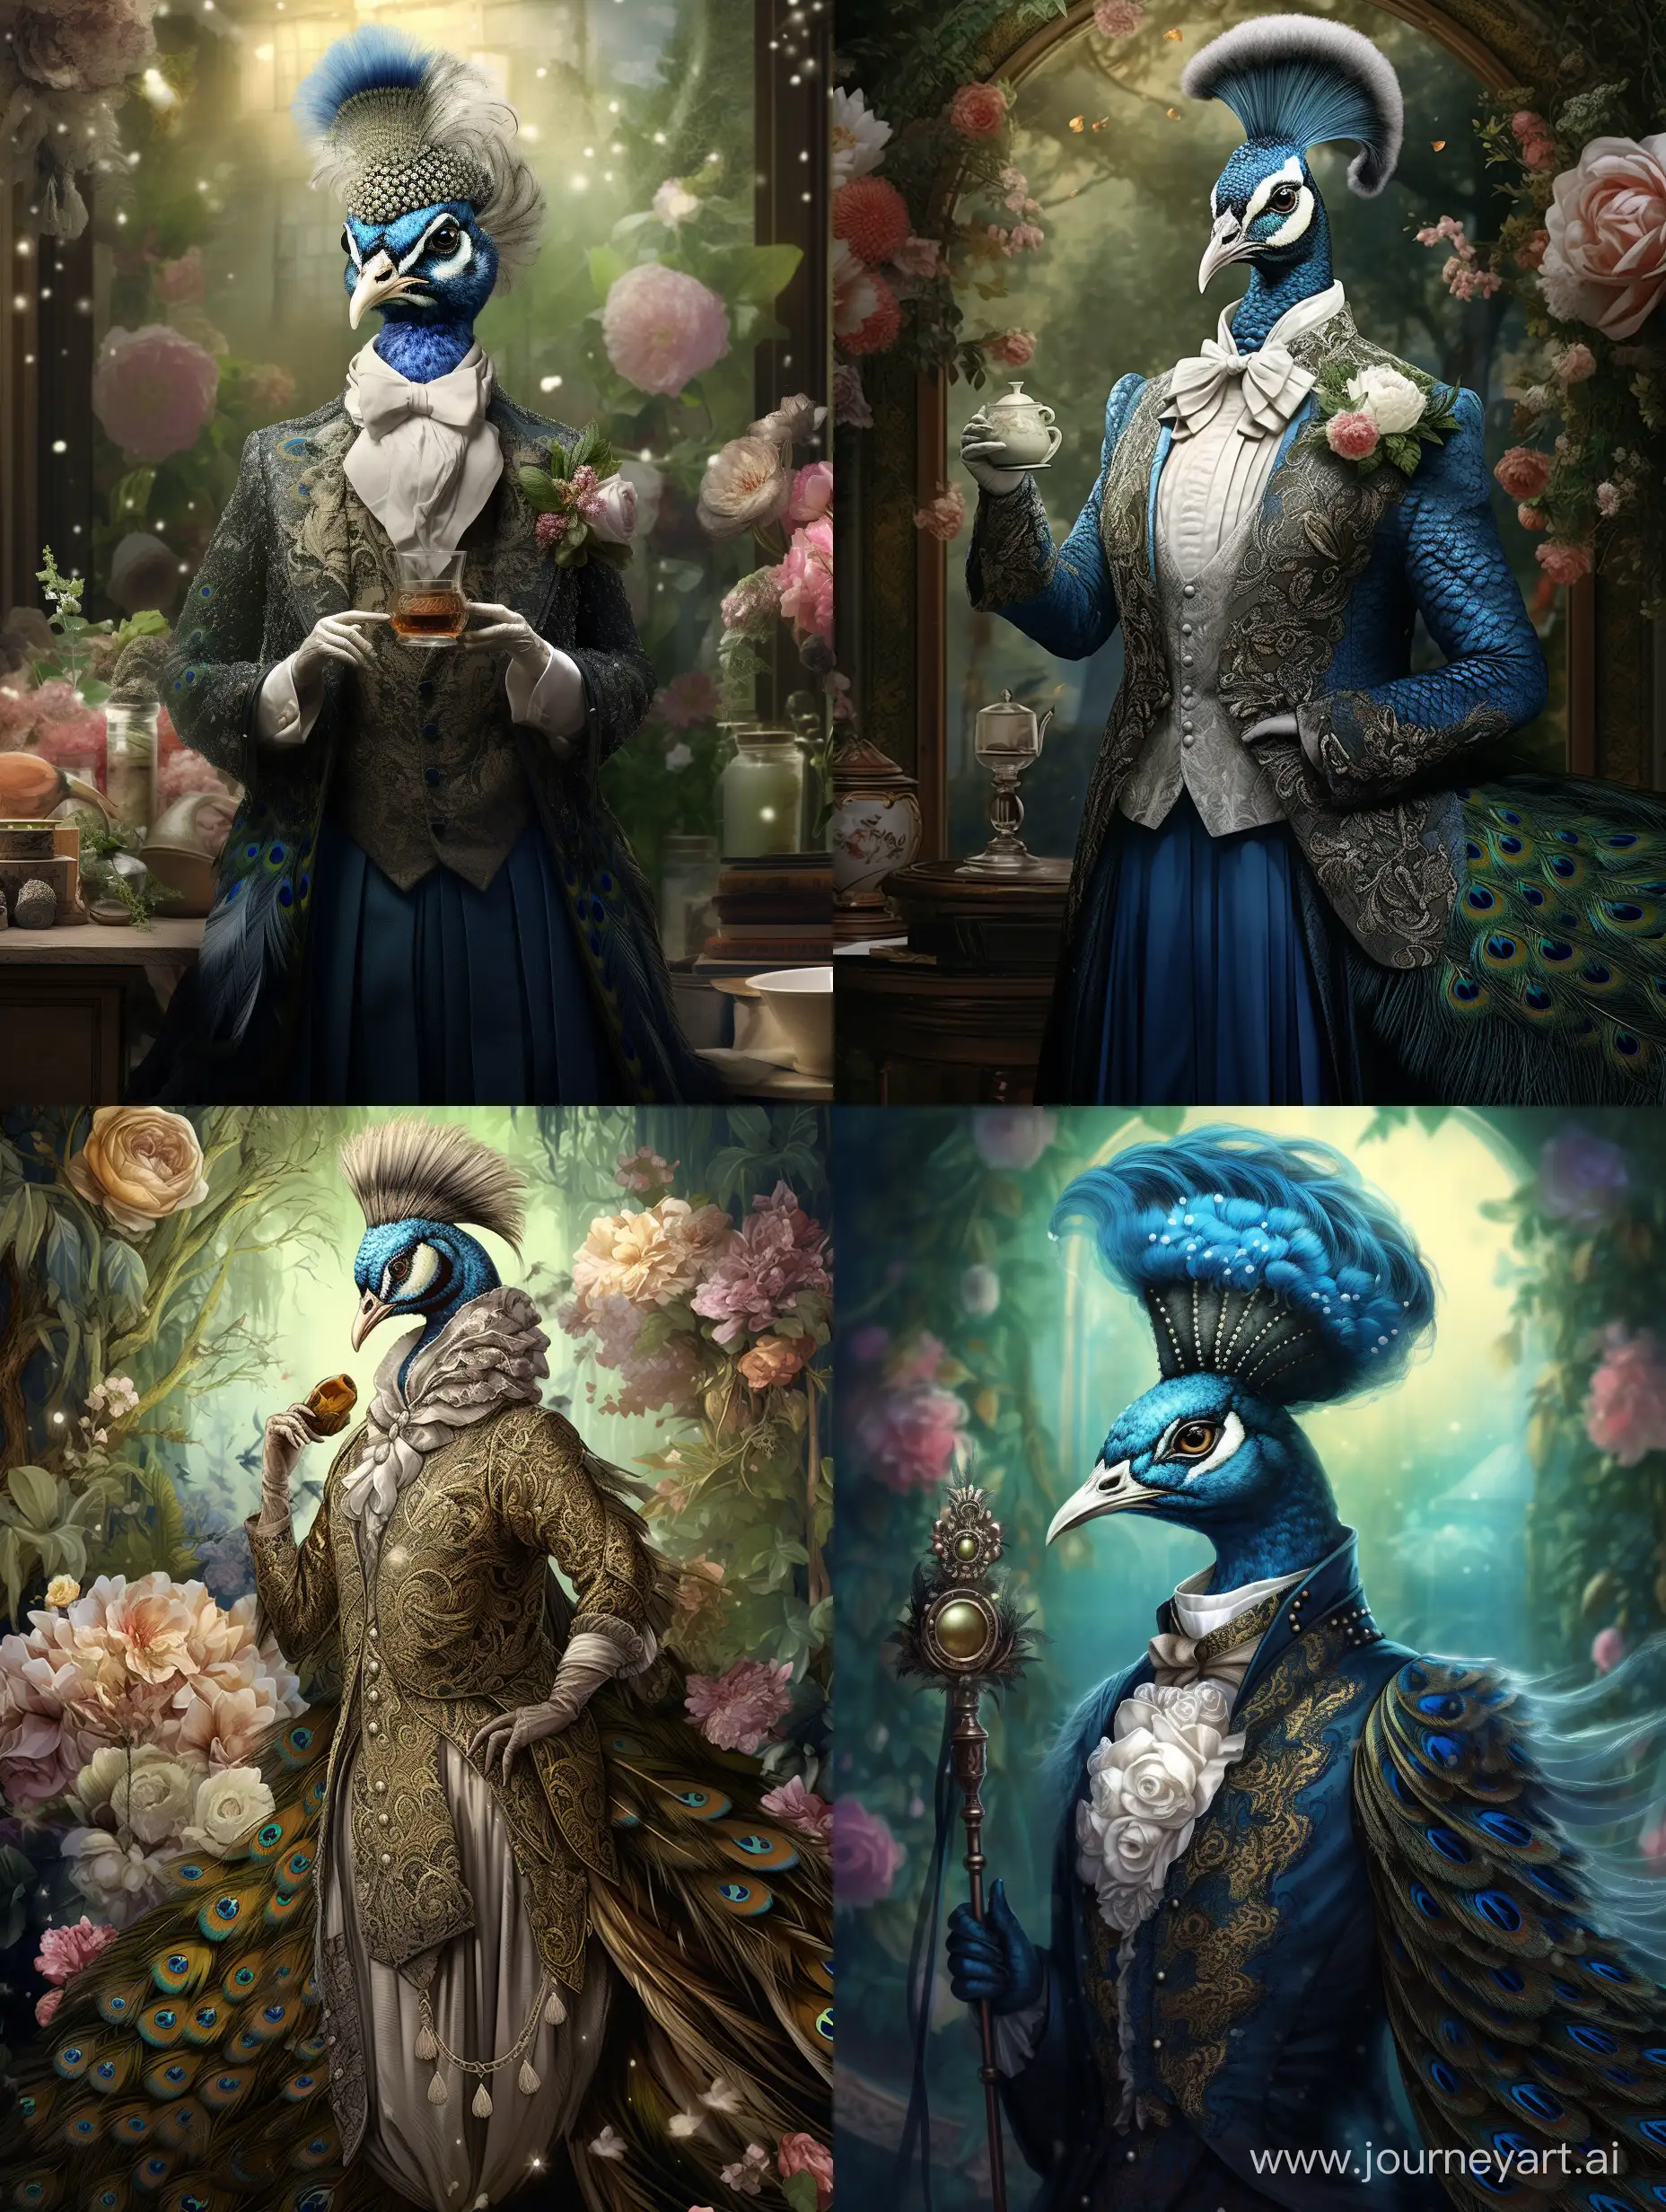 Elegant-Peacock-in-Fashion-Attire-with-Perfume-Against-a-Beautiful-Background